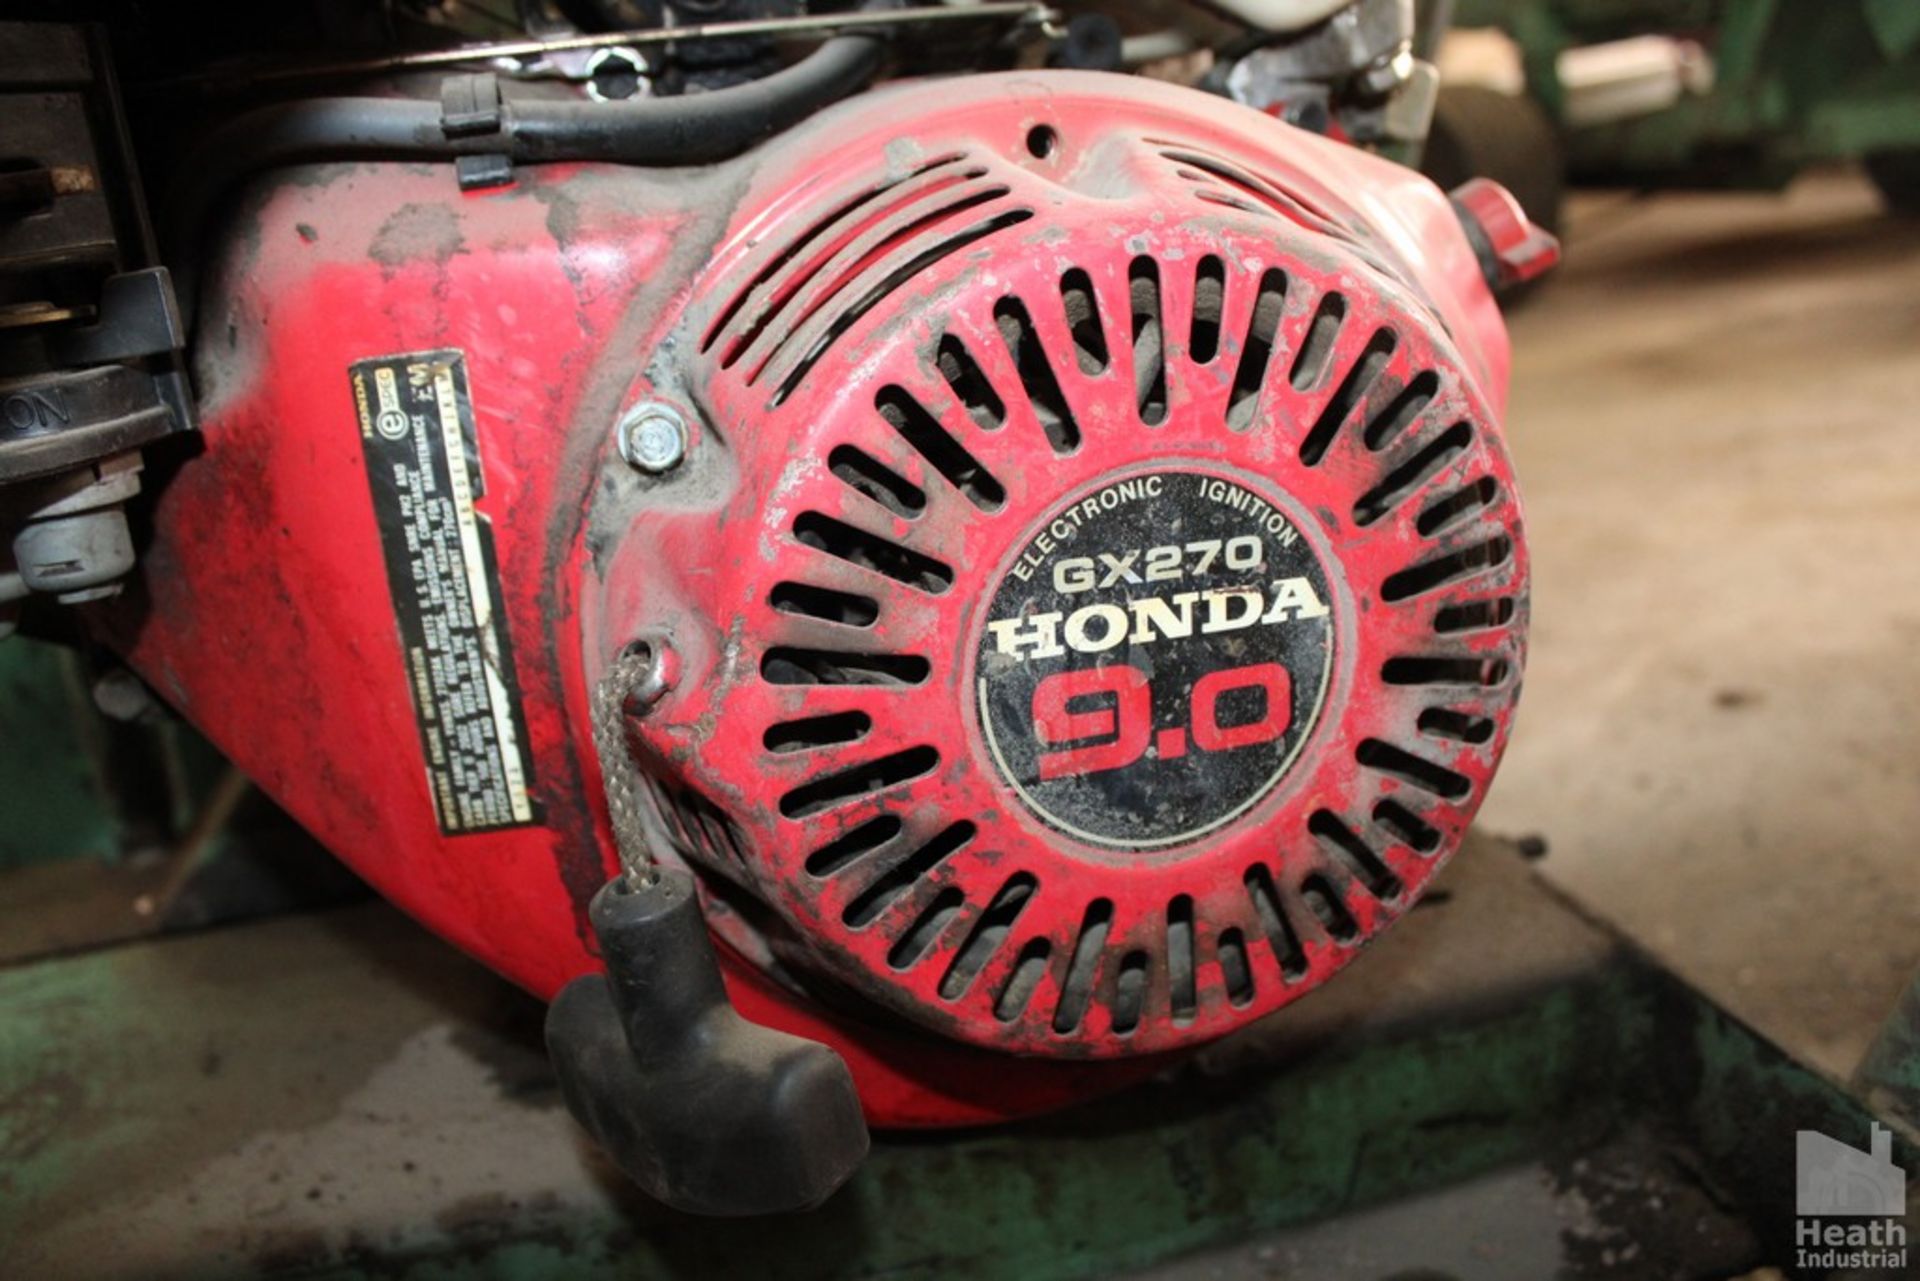 GARLOCK ROOFING SAW WITH HONDA GX270 GAS ENGINE - Image 3 of 4